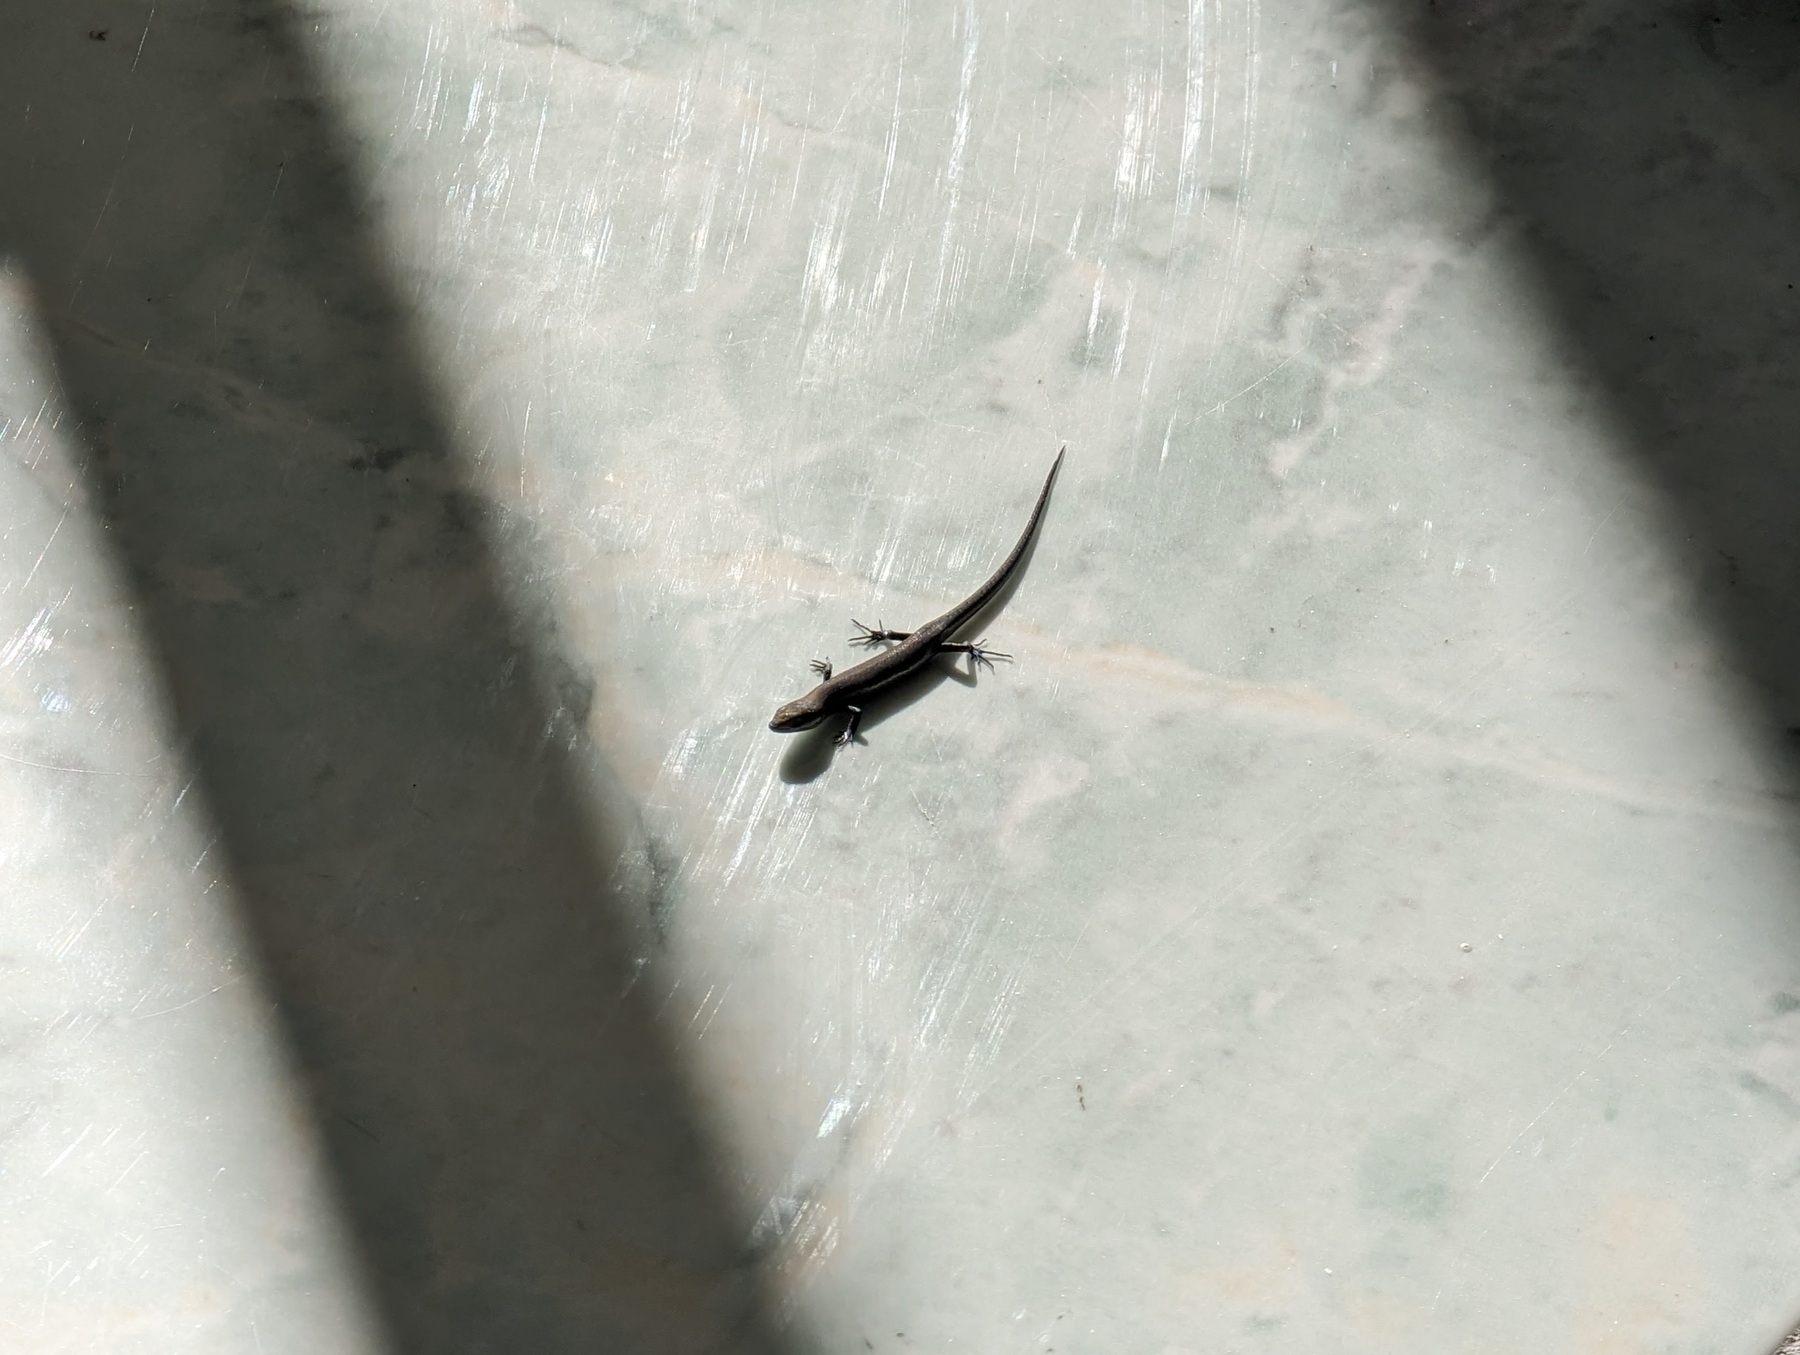 Skink on a ceramic tile in the sunlight with some shadows on the side.